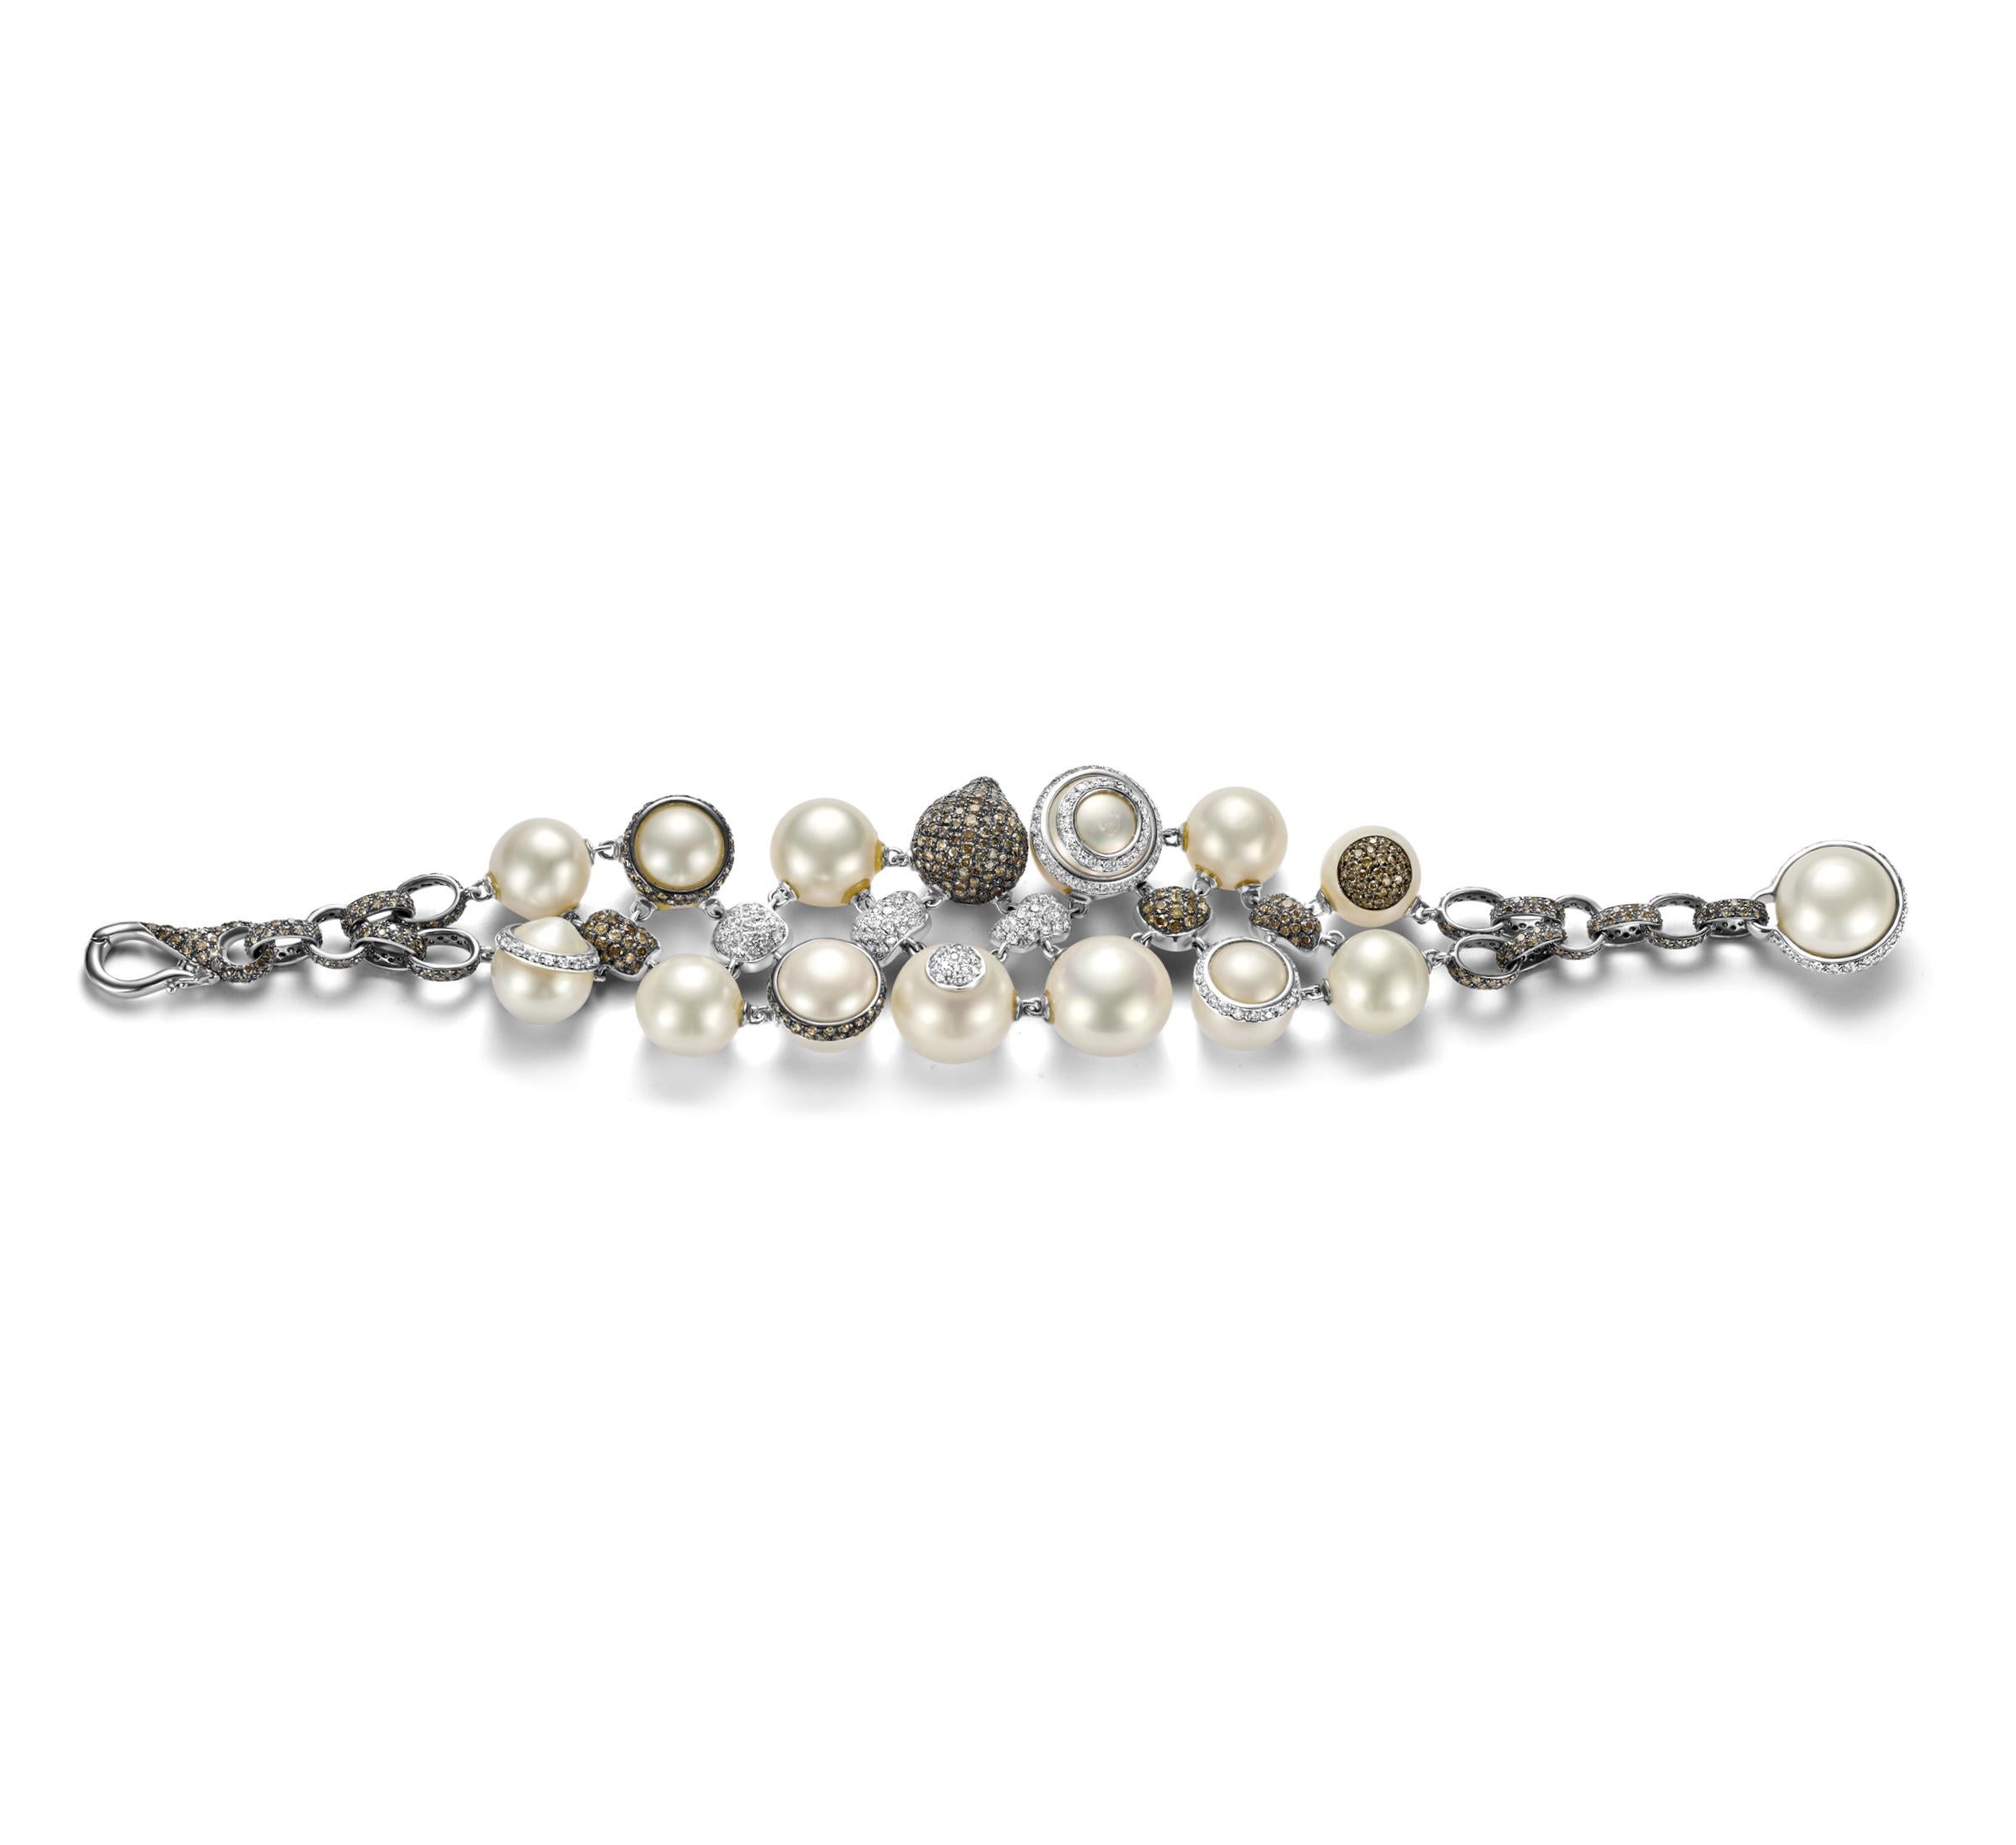 18kt White Gold Bracelet 12.6ct White & Cognac Diamonds Pearl Has Matching Ring For Sale 8